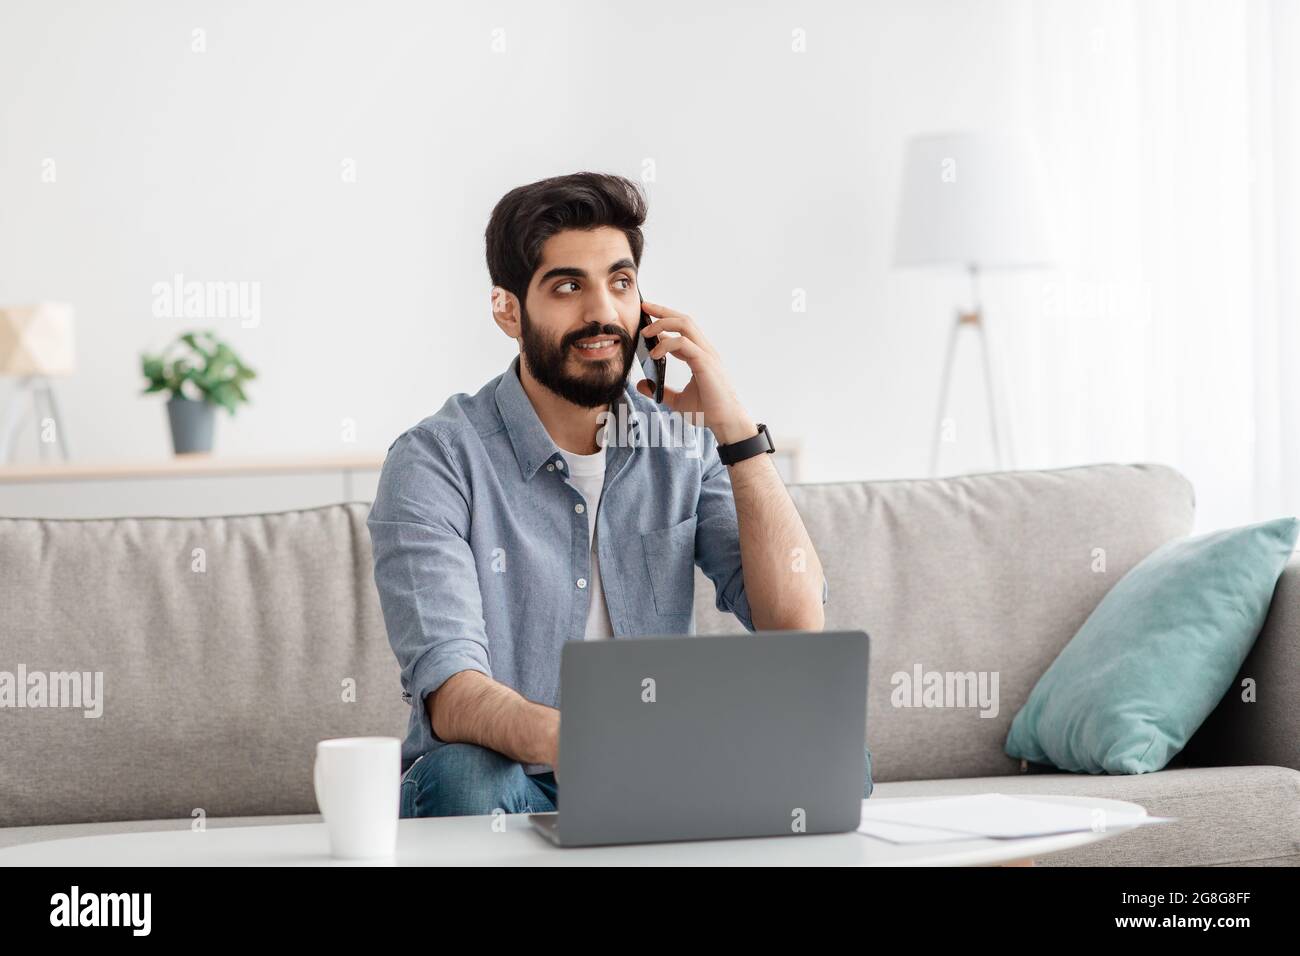 Freelance lifestyle. Arab man using laptop and talking on cellphone, working while sitting on sofa in living room Stock Photo